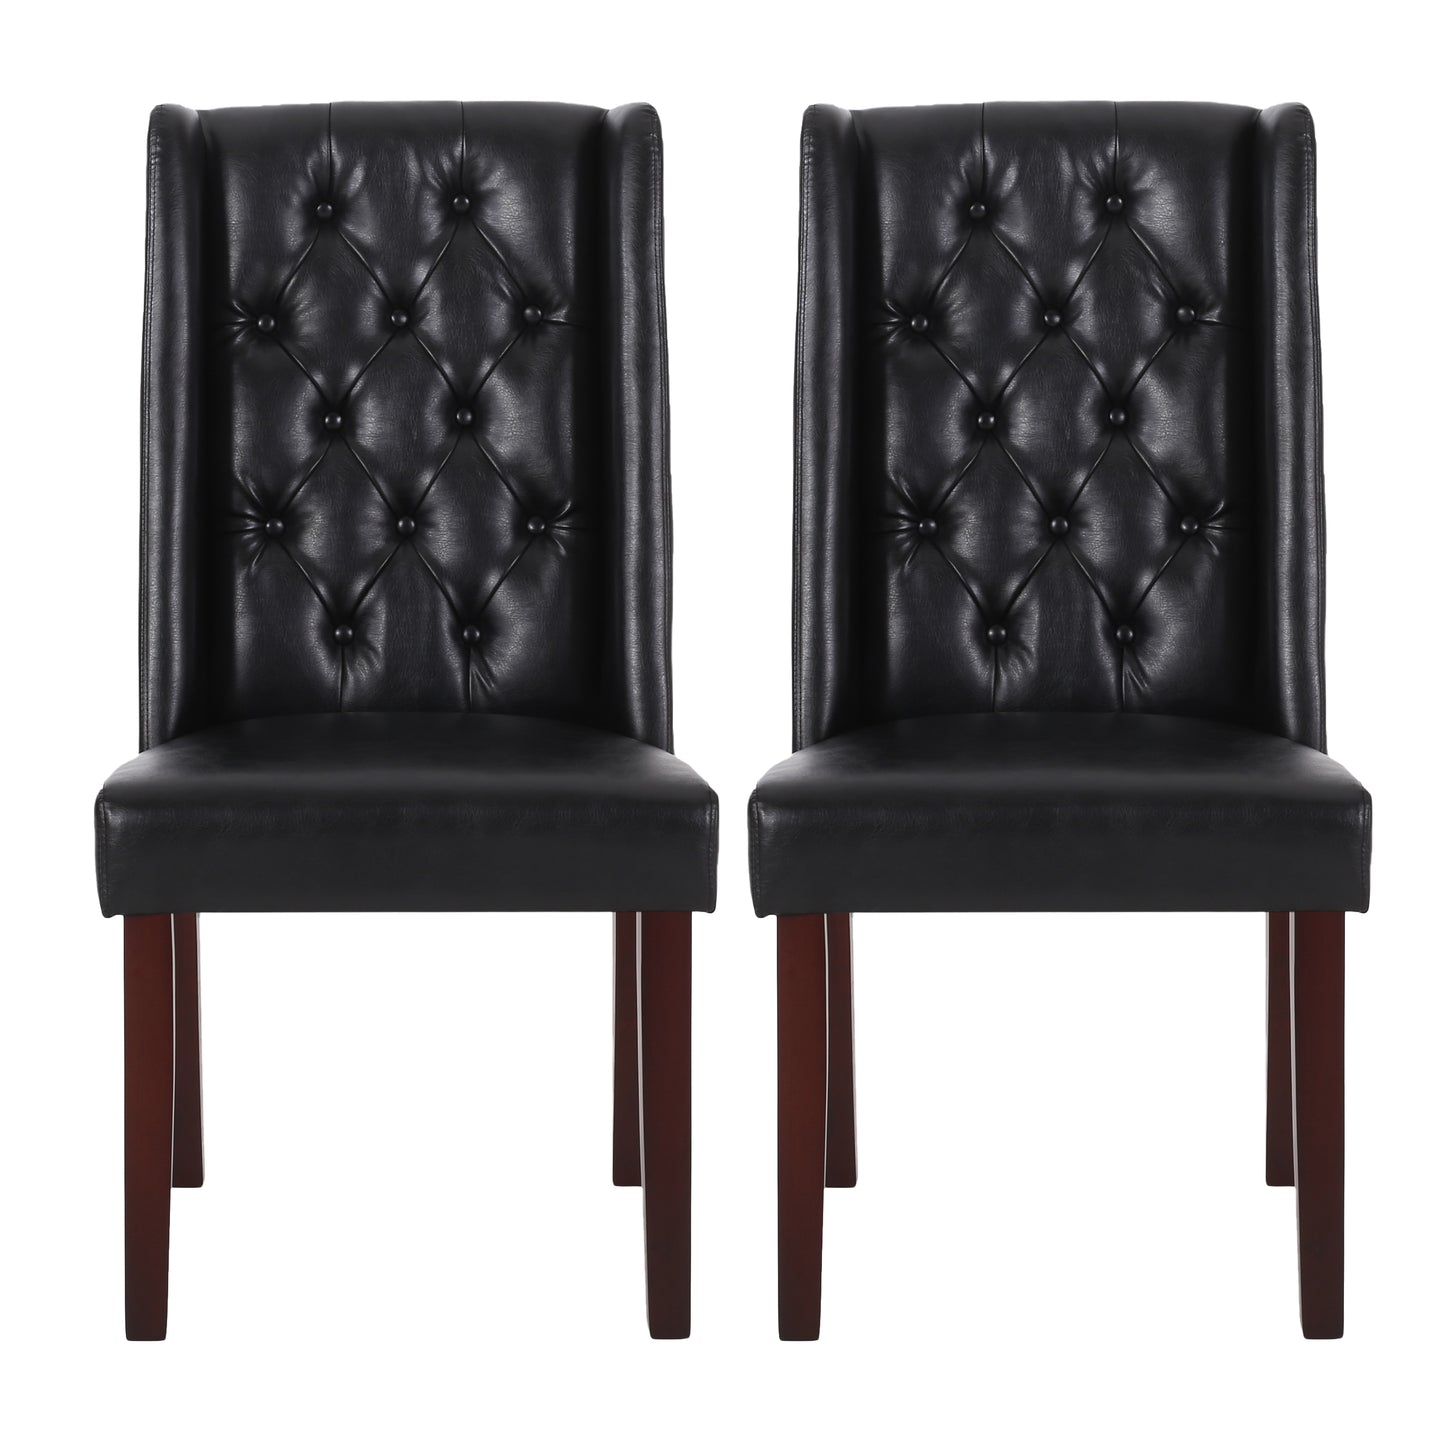 Apaloosa Contemporary Tufted Dining Chairs, Set of 2